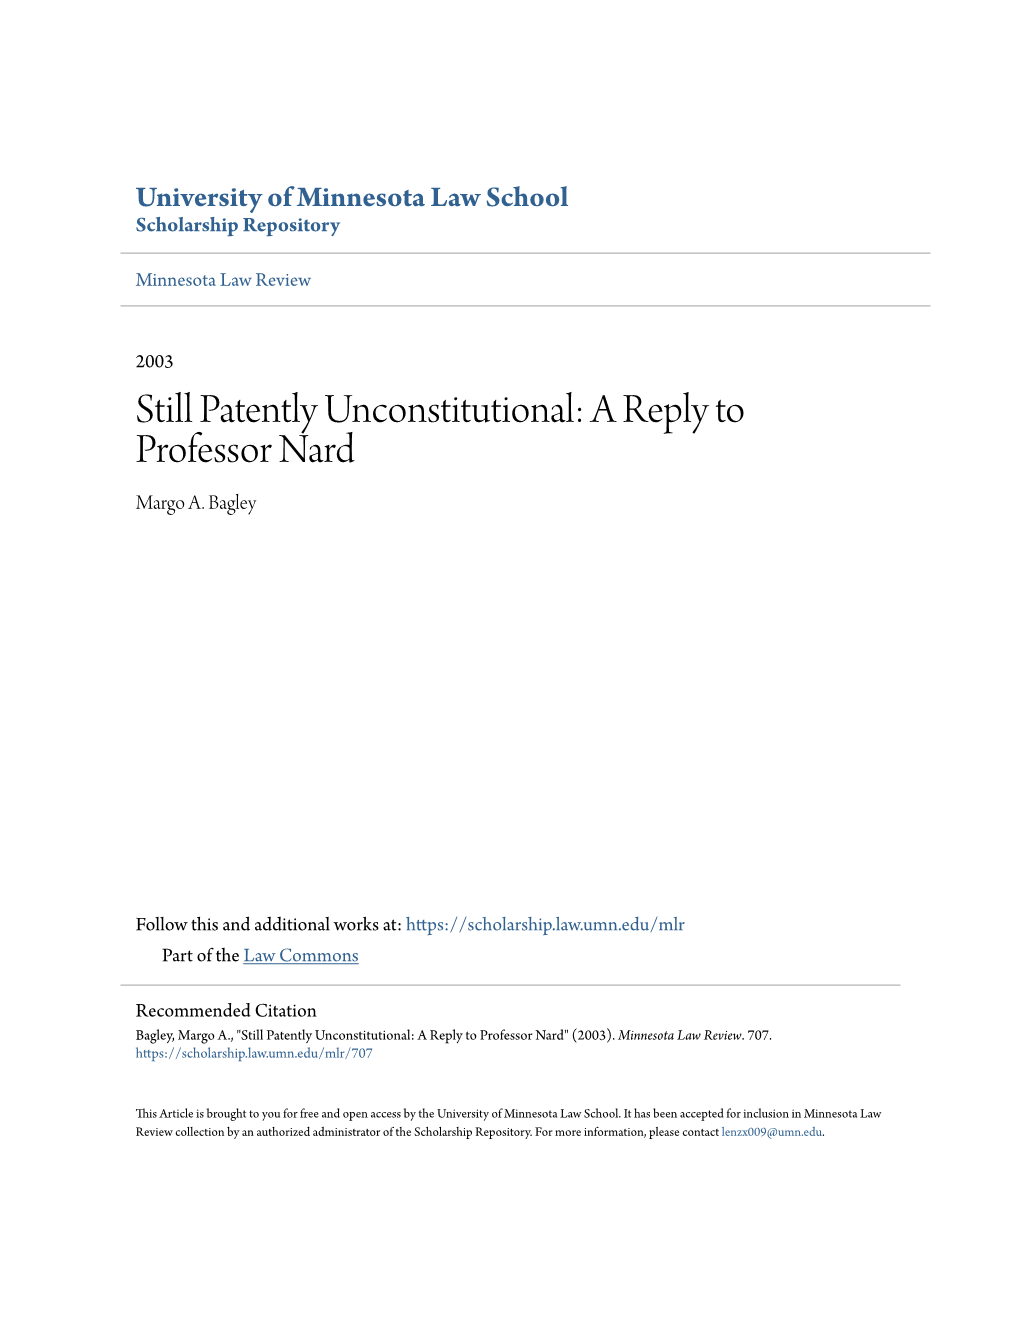 Still Patently Unconstitutional: a Reply to Professor Nard Margo A